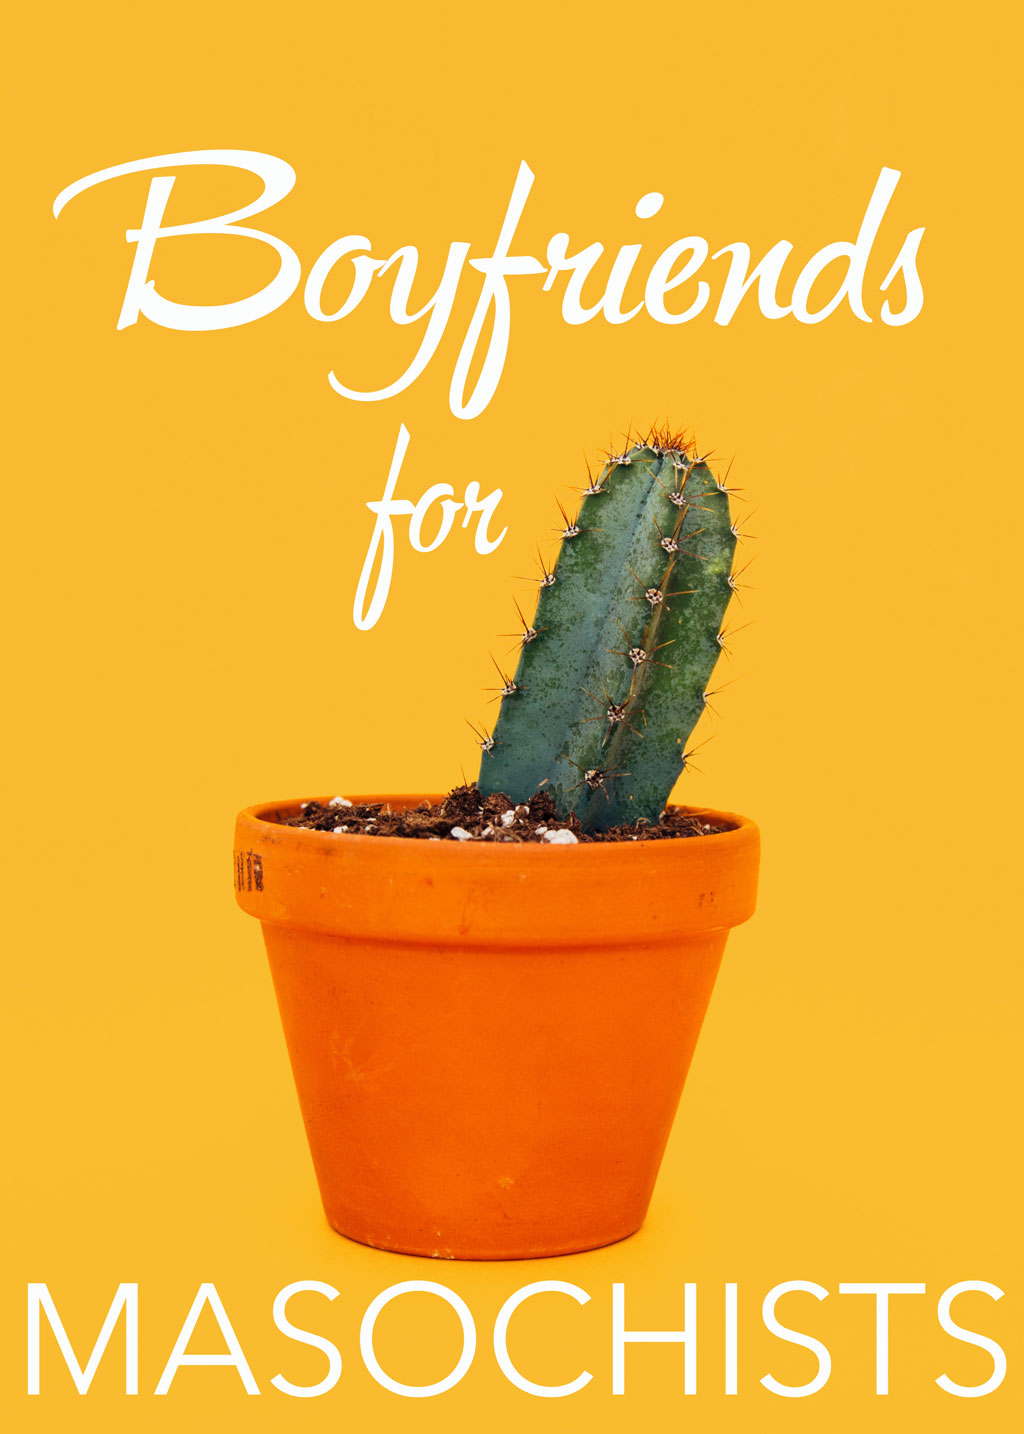 Potted cactus against yellow background with title